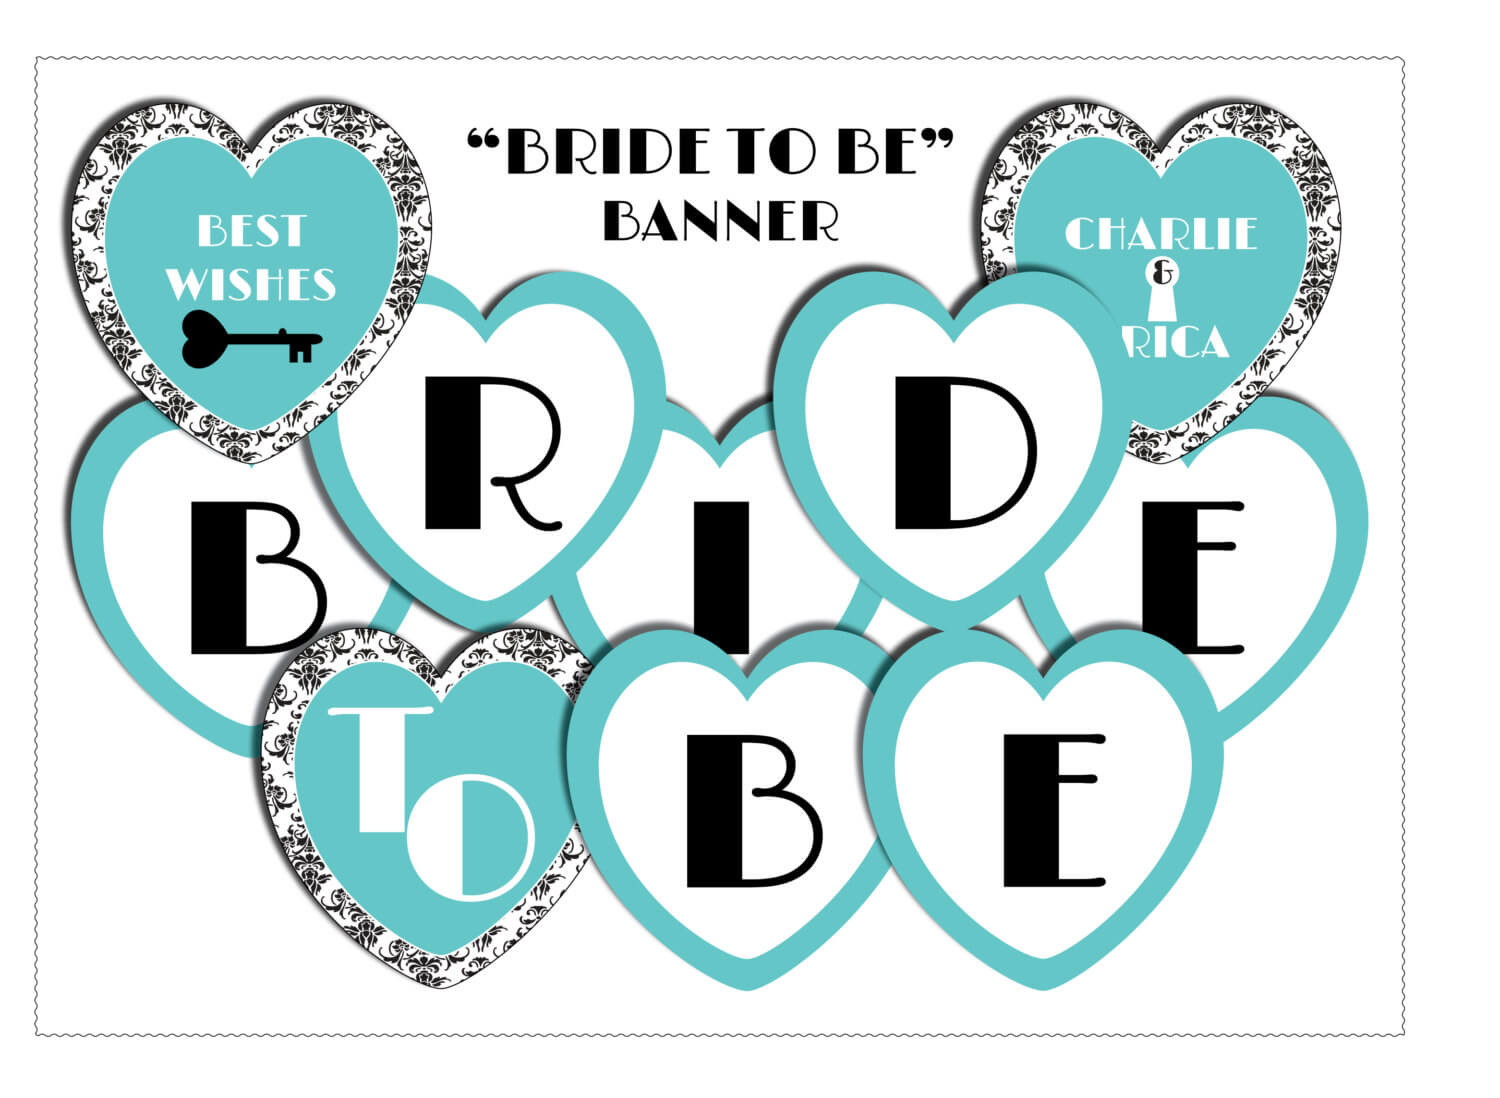 11 Best Photos Of Bride To Be Banner Template – Diy Bridal Throughout Bride To Be Banner Template